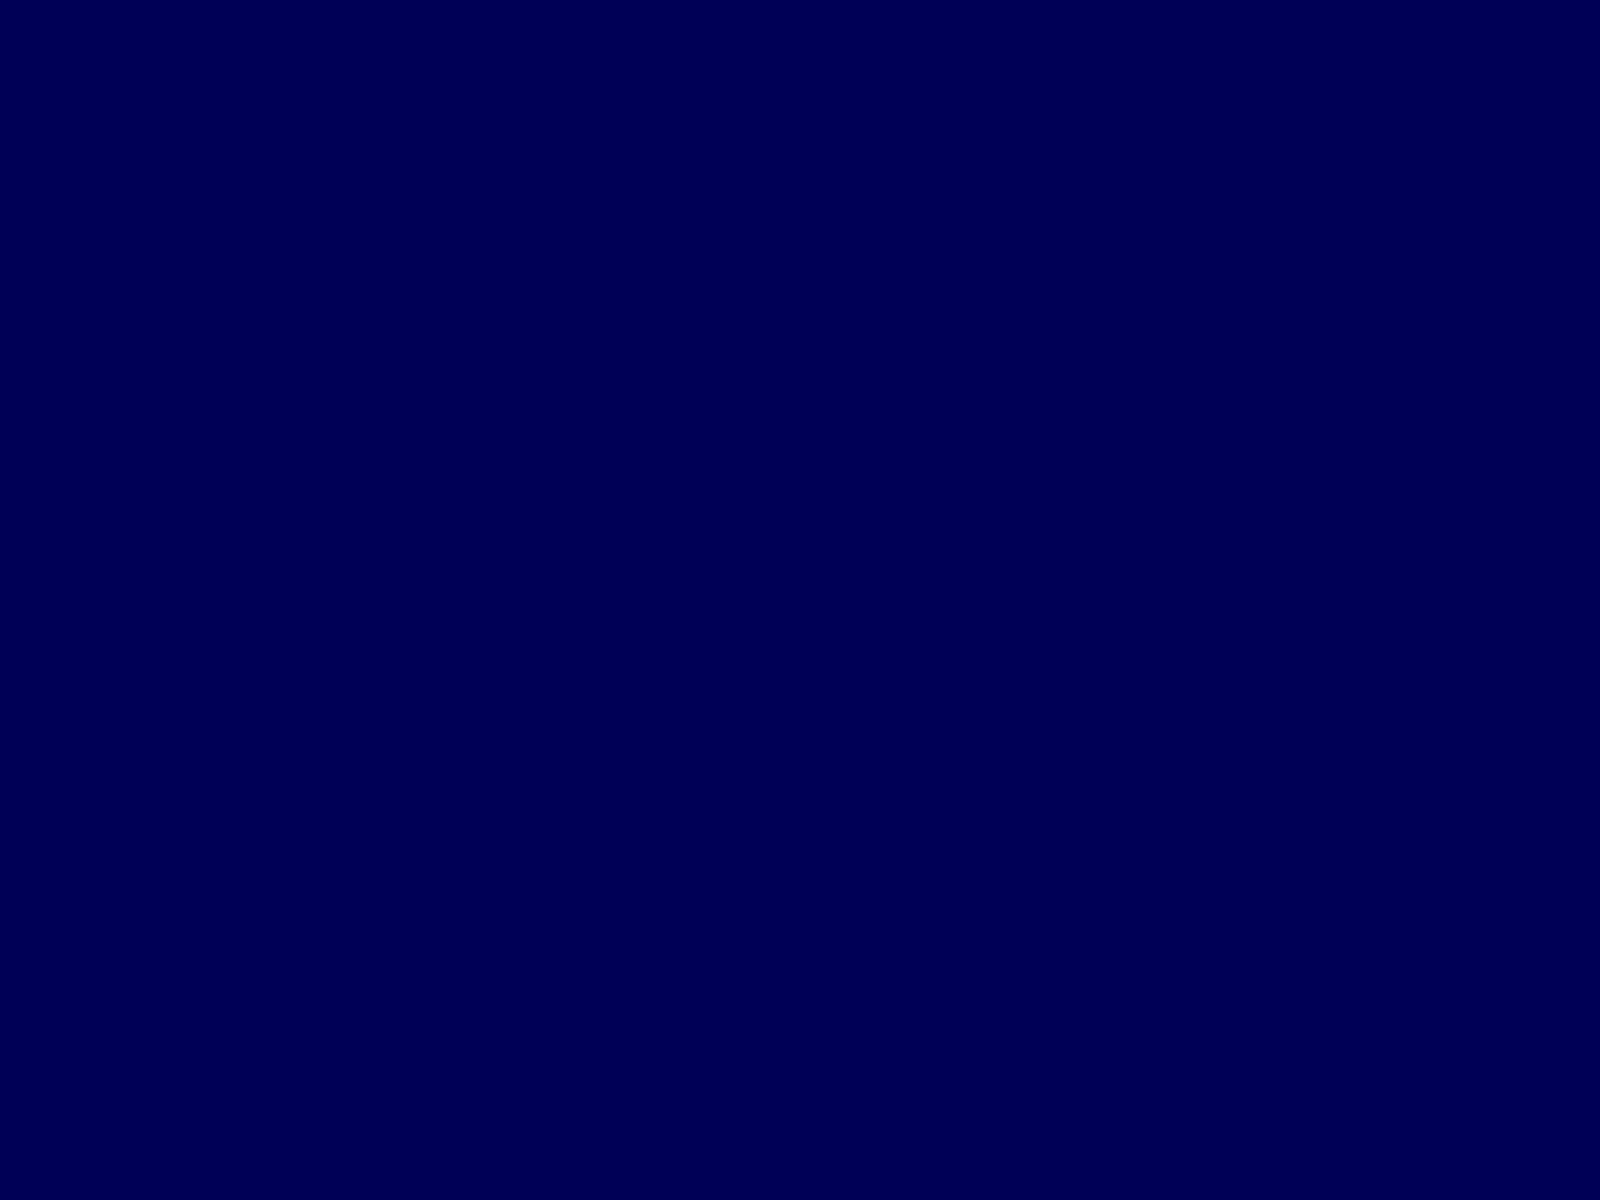 a dark blue background with a few white dots on it